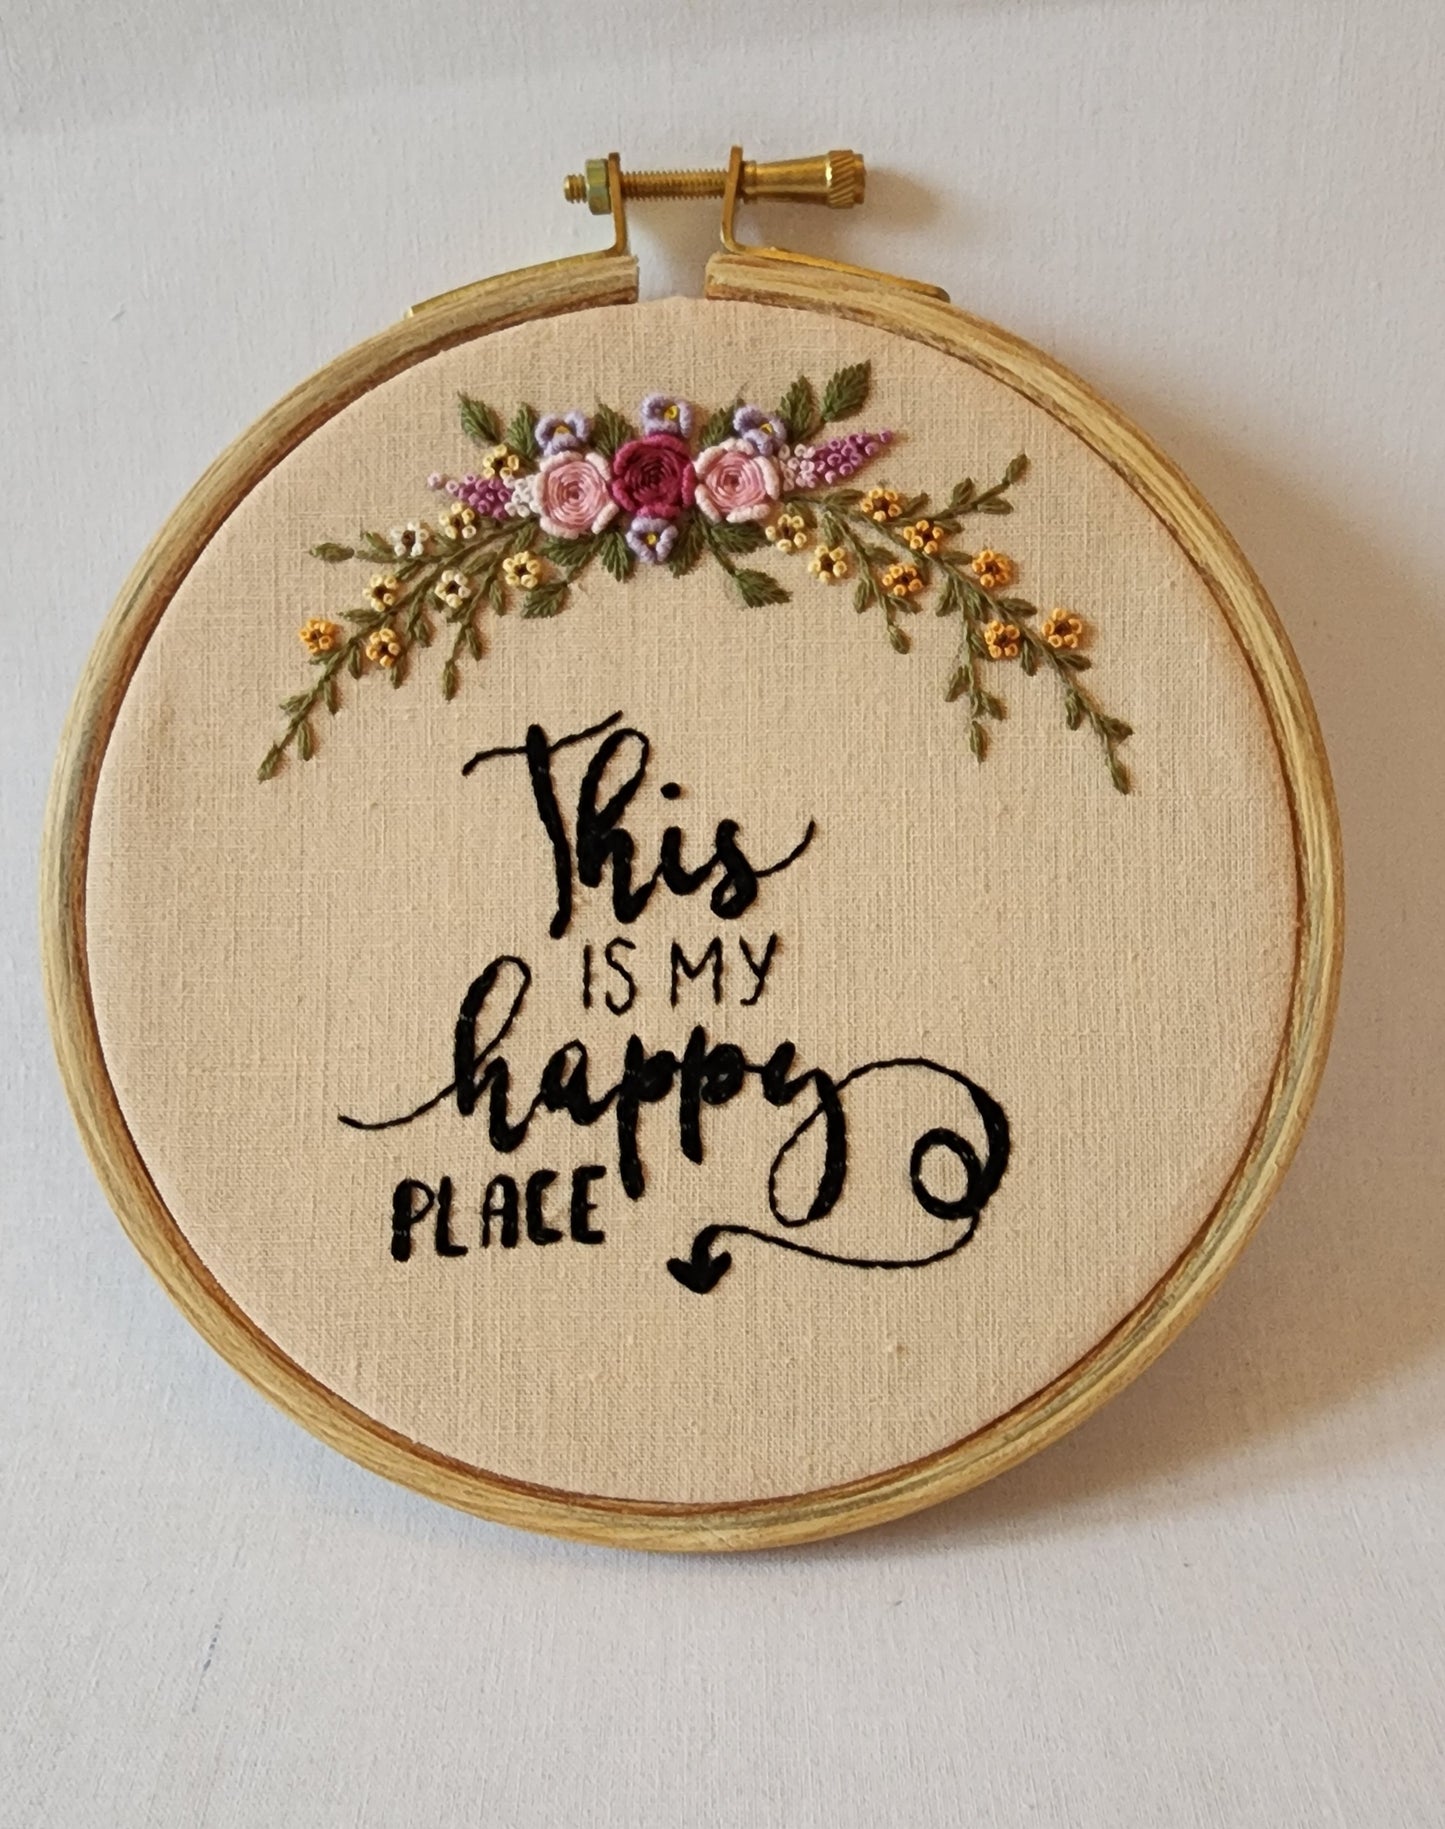 Ikali - Happy Place - Hand-embroidered Wall-hanging Hoop